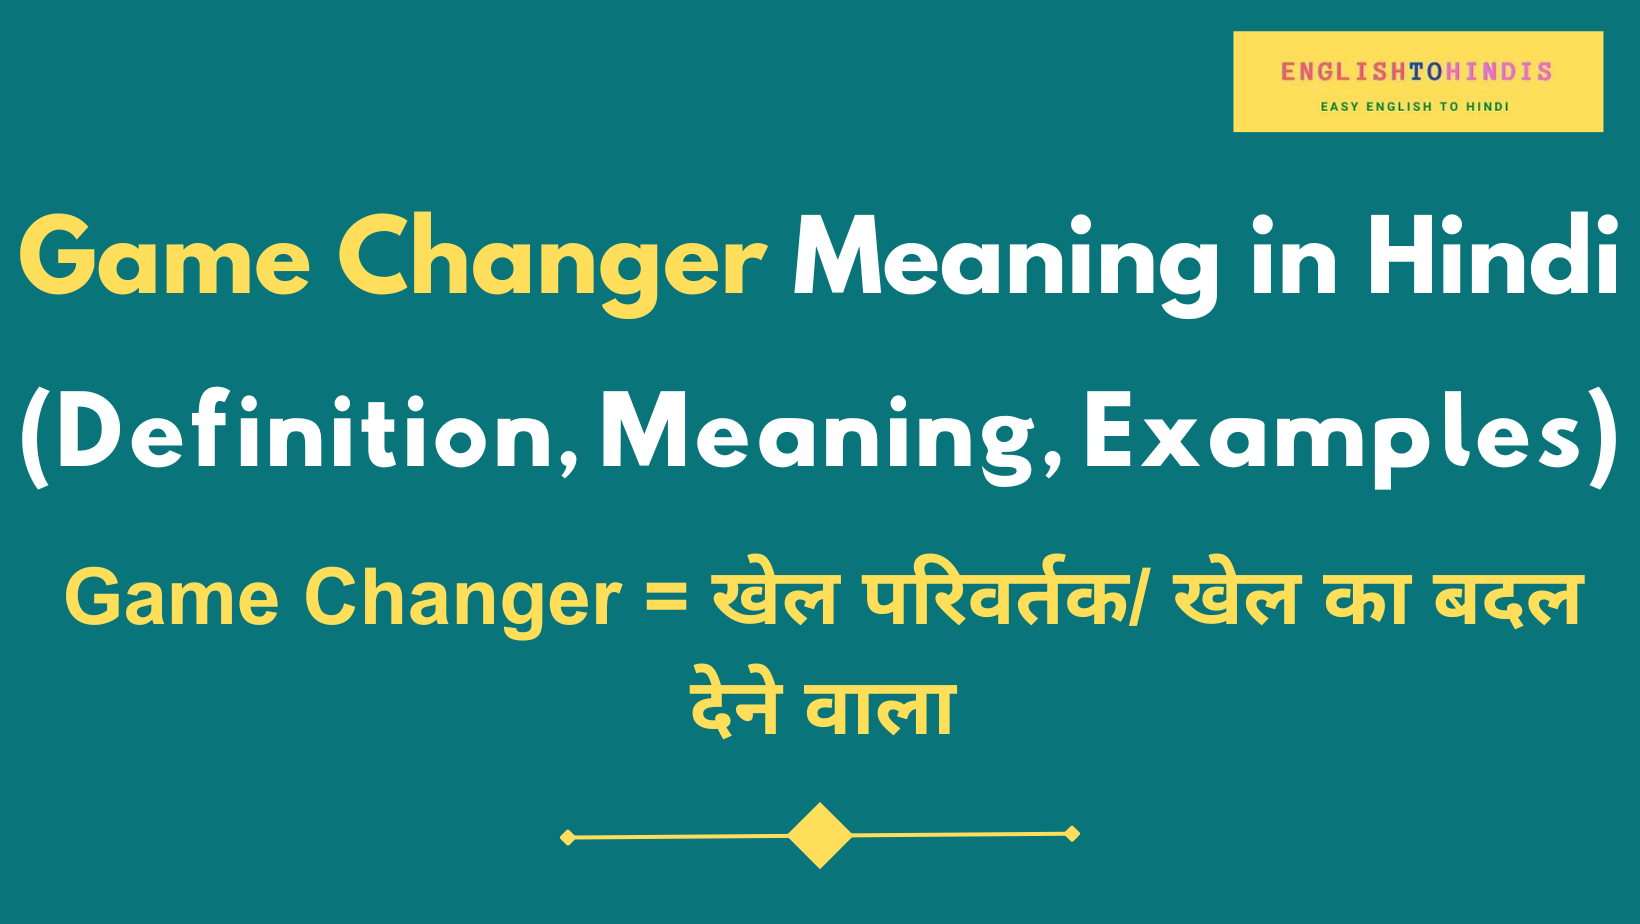 Game Changer Meaning in Hindi